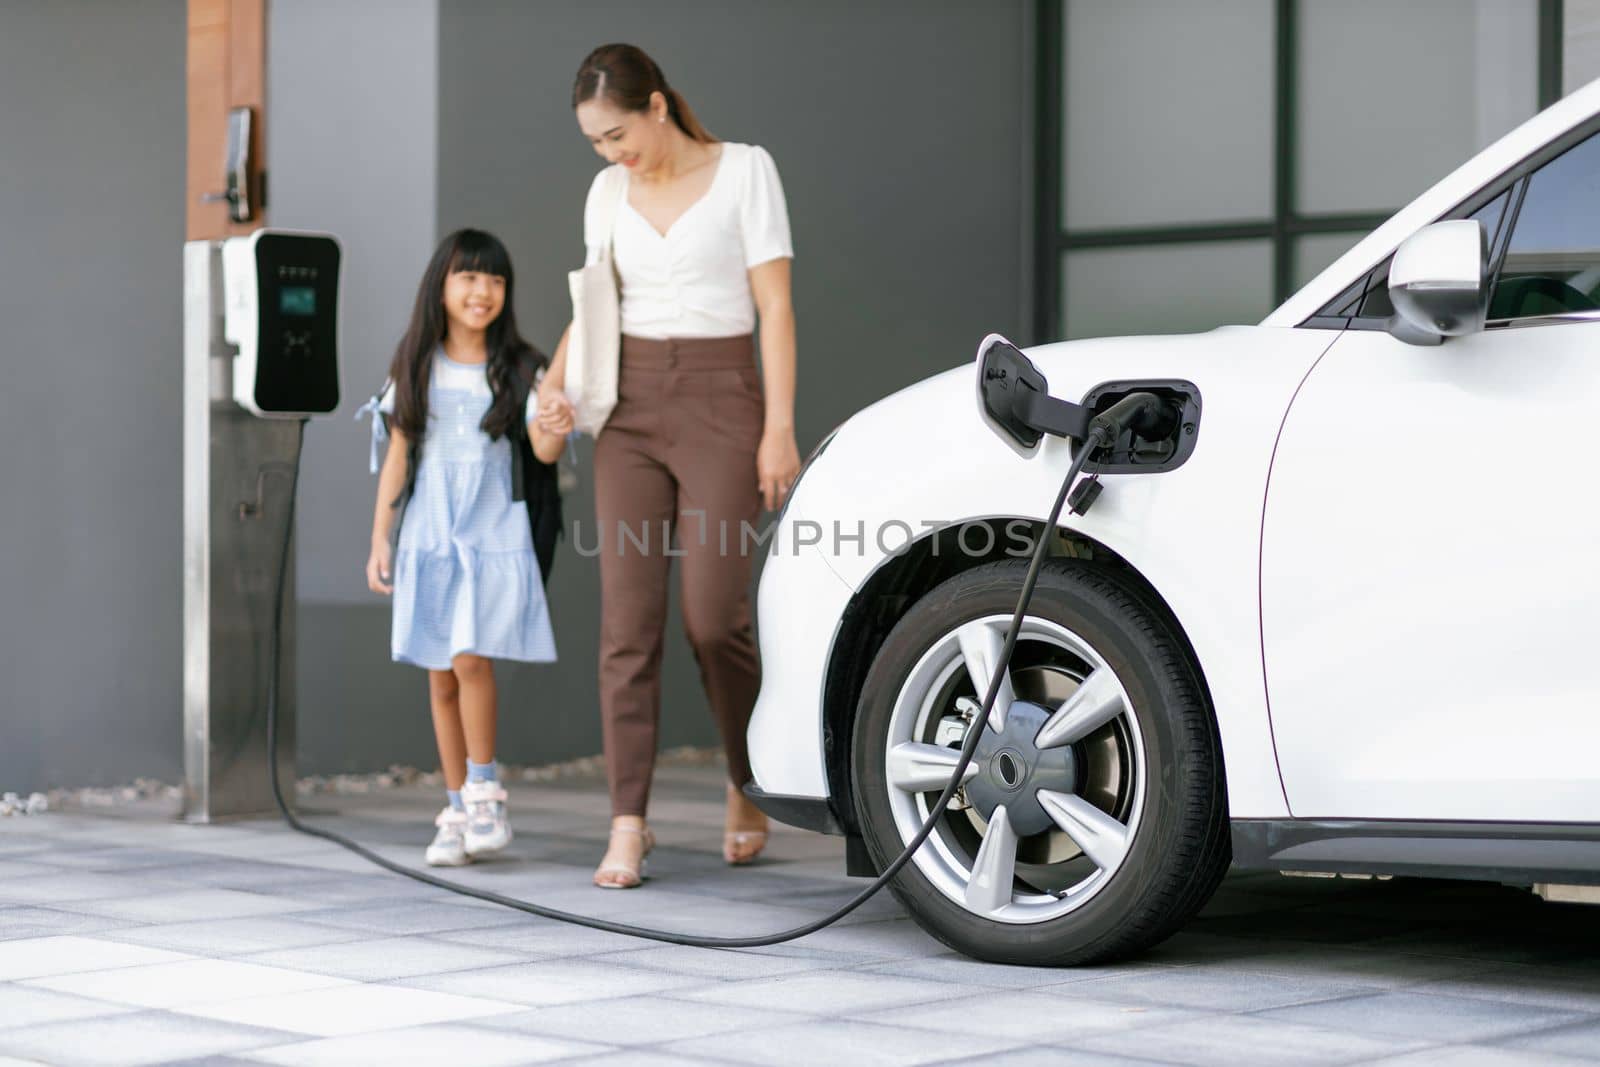 Focus EV car recharging at home charging station with blurred progressive woman and young girl in background for alternative clean energy technology concept for renewable electric vehicle.